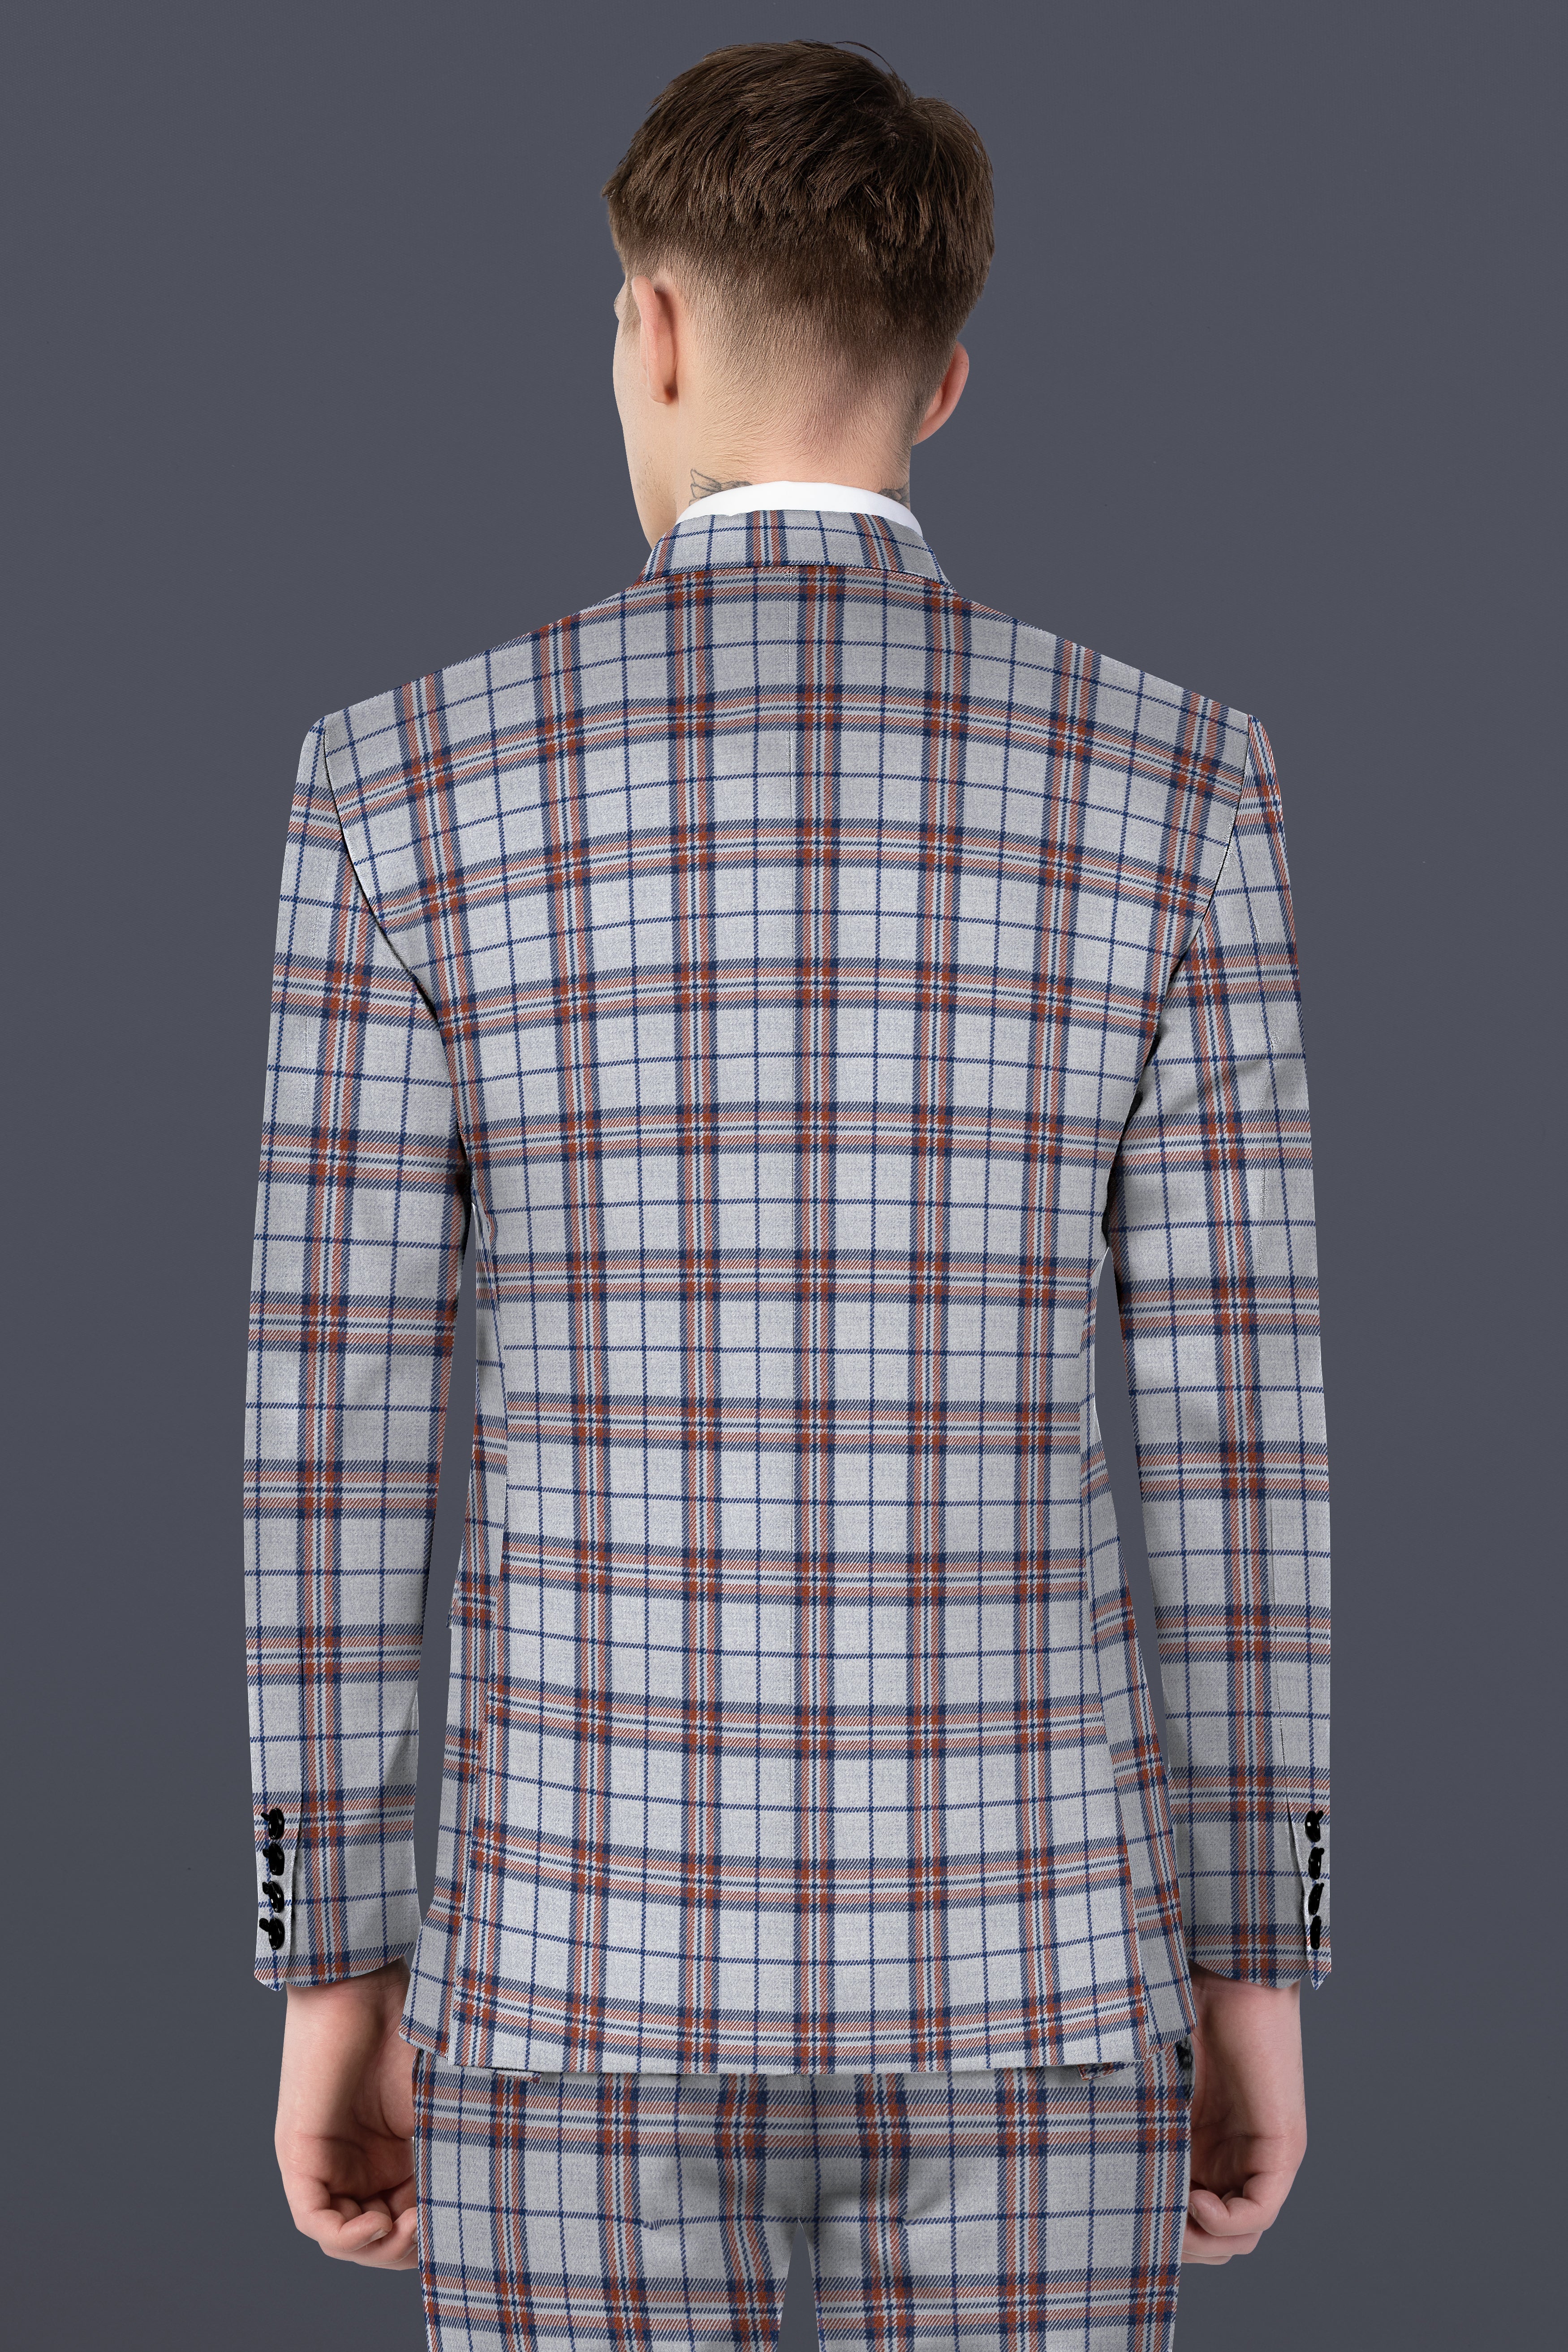 Cadet Grey with Maroon and Blue Plaid Tweed Suit